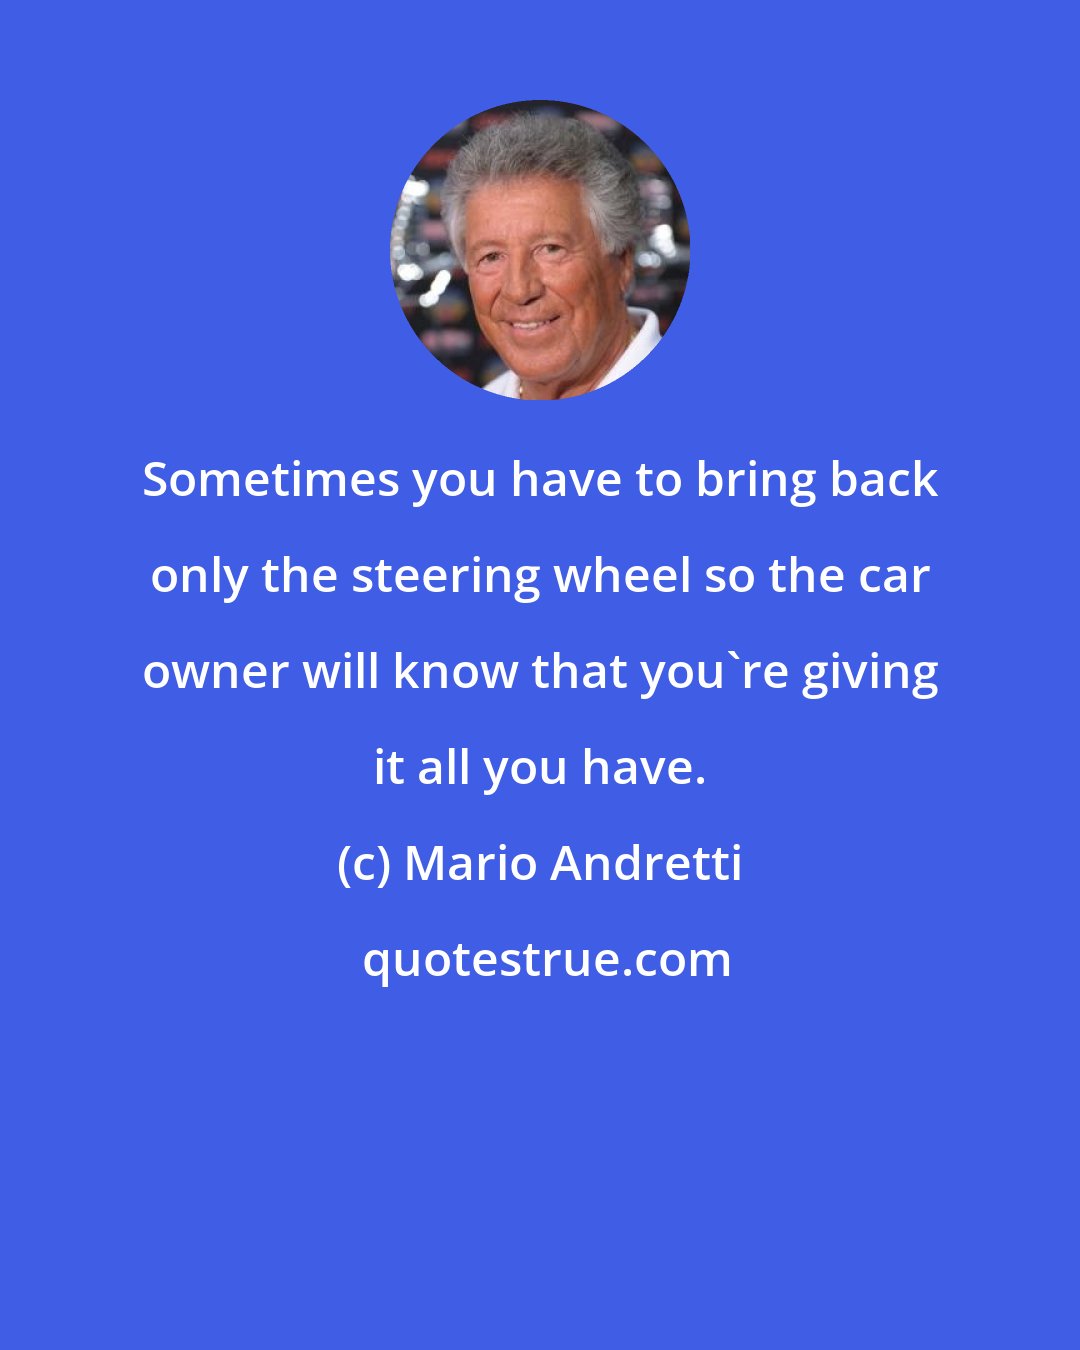 Mario Andretti: Sometimes you have to bring back only the steering wheel so the car owner will know that you're giving it all you have.